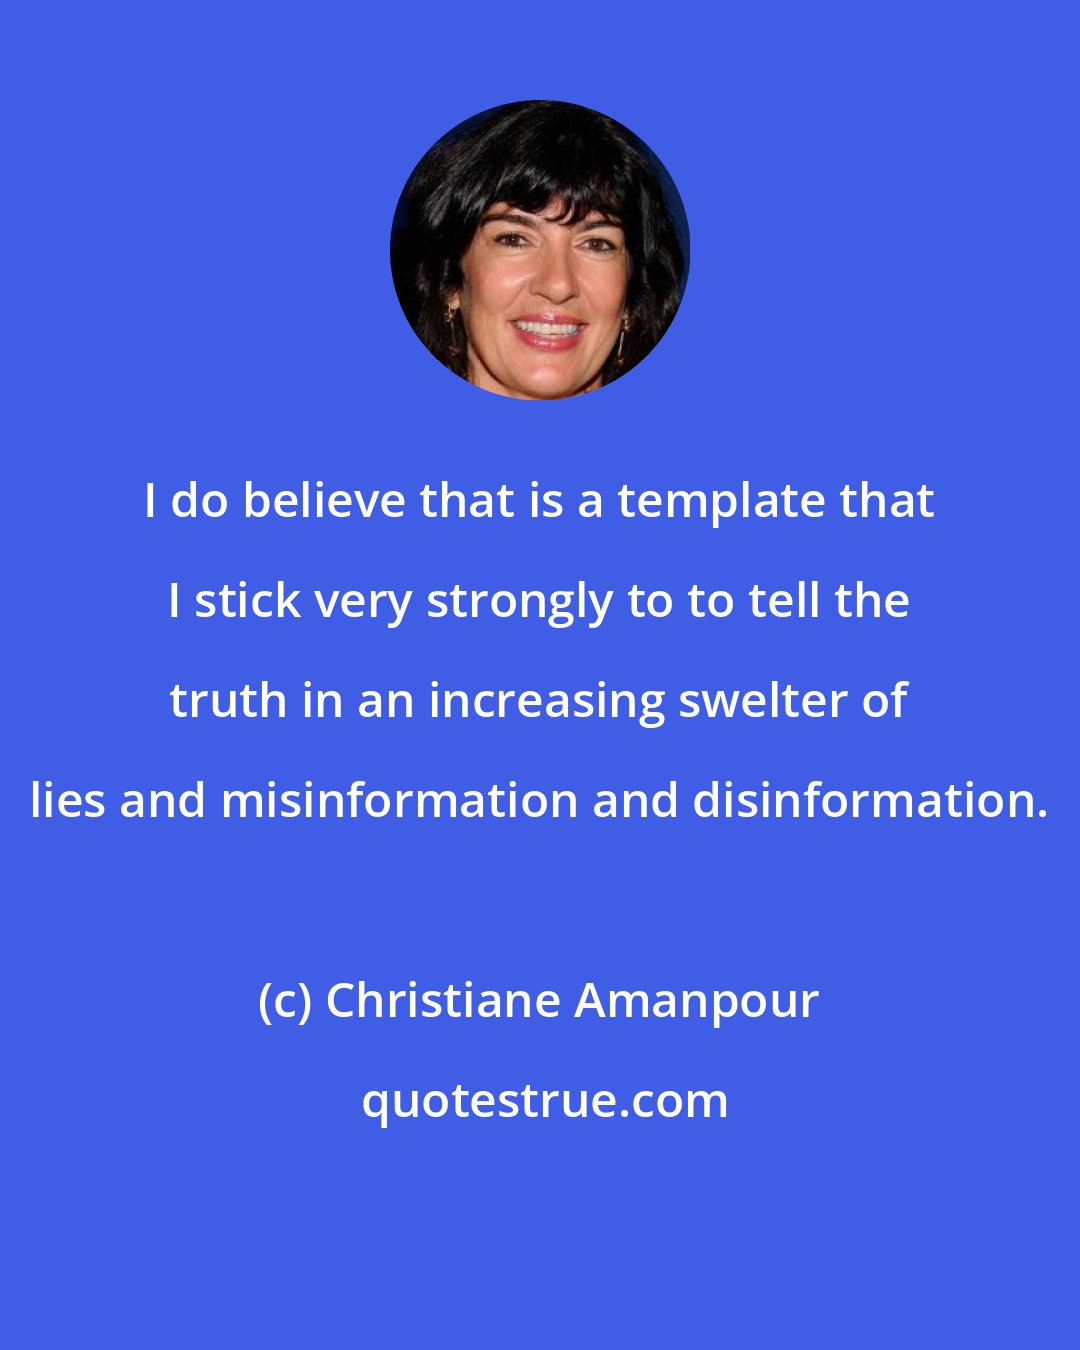 Christiane Amanpour: I do believe that is a template that I stick very strongly to to tell the truth in an increasing swelter of lies and misinformation and disinformation.